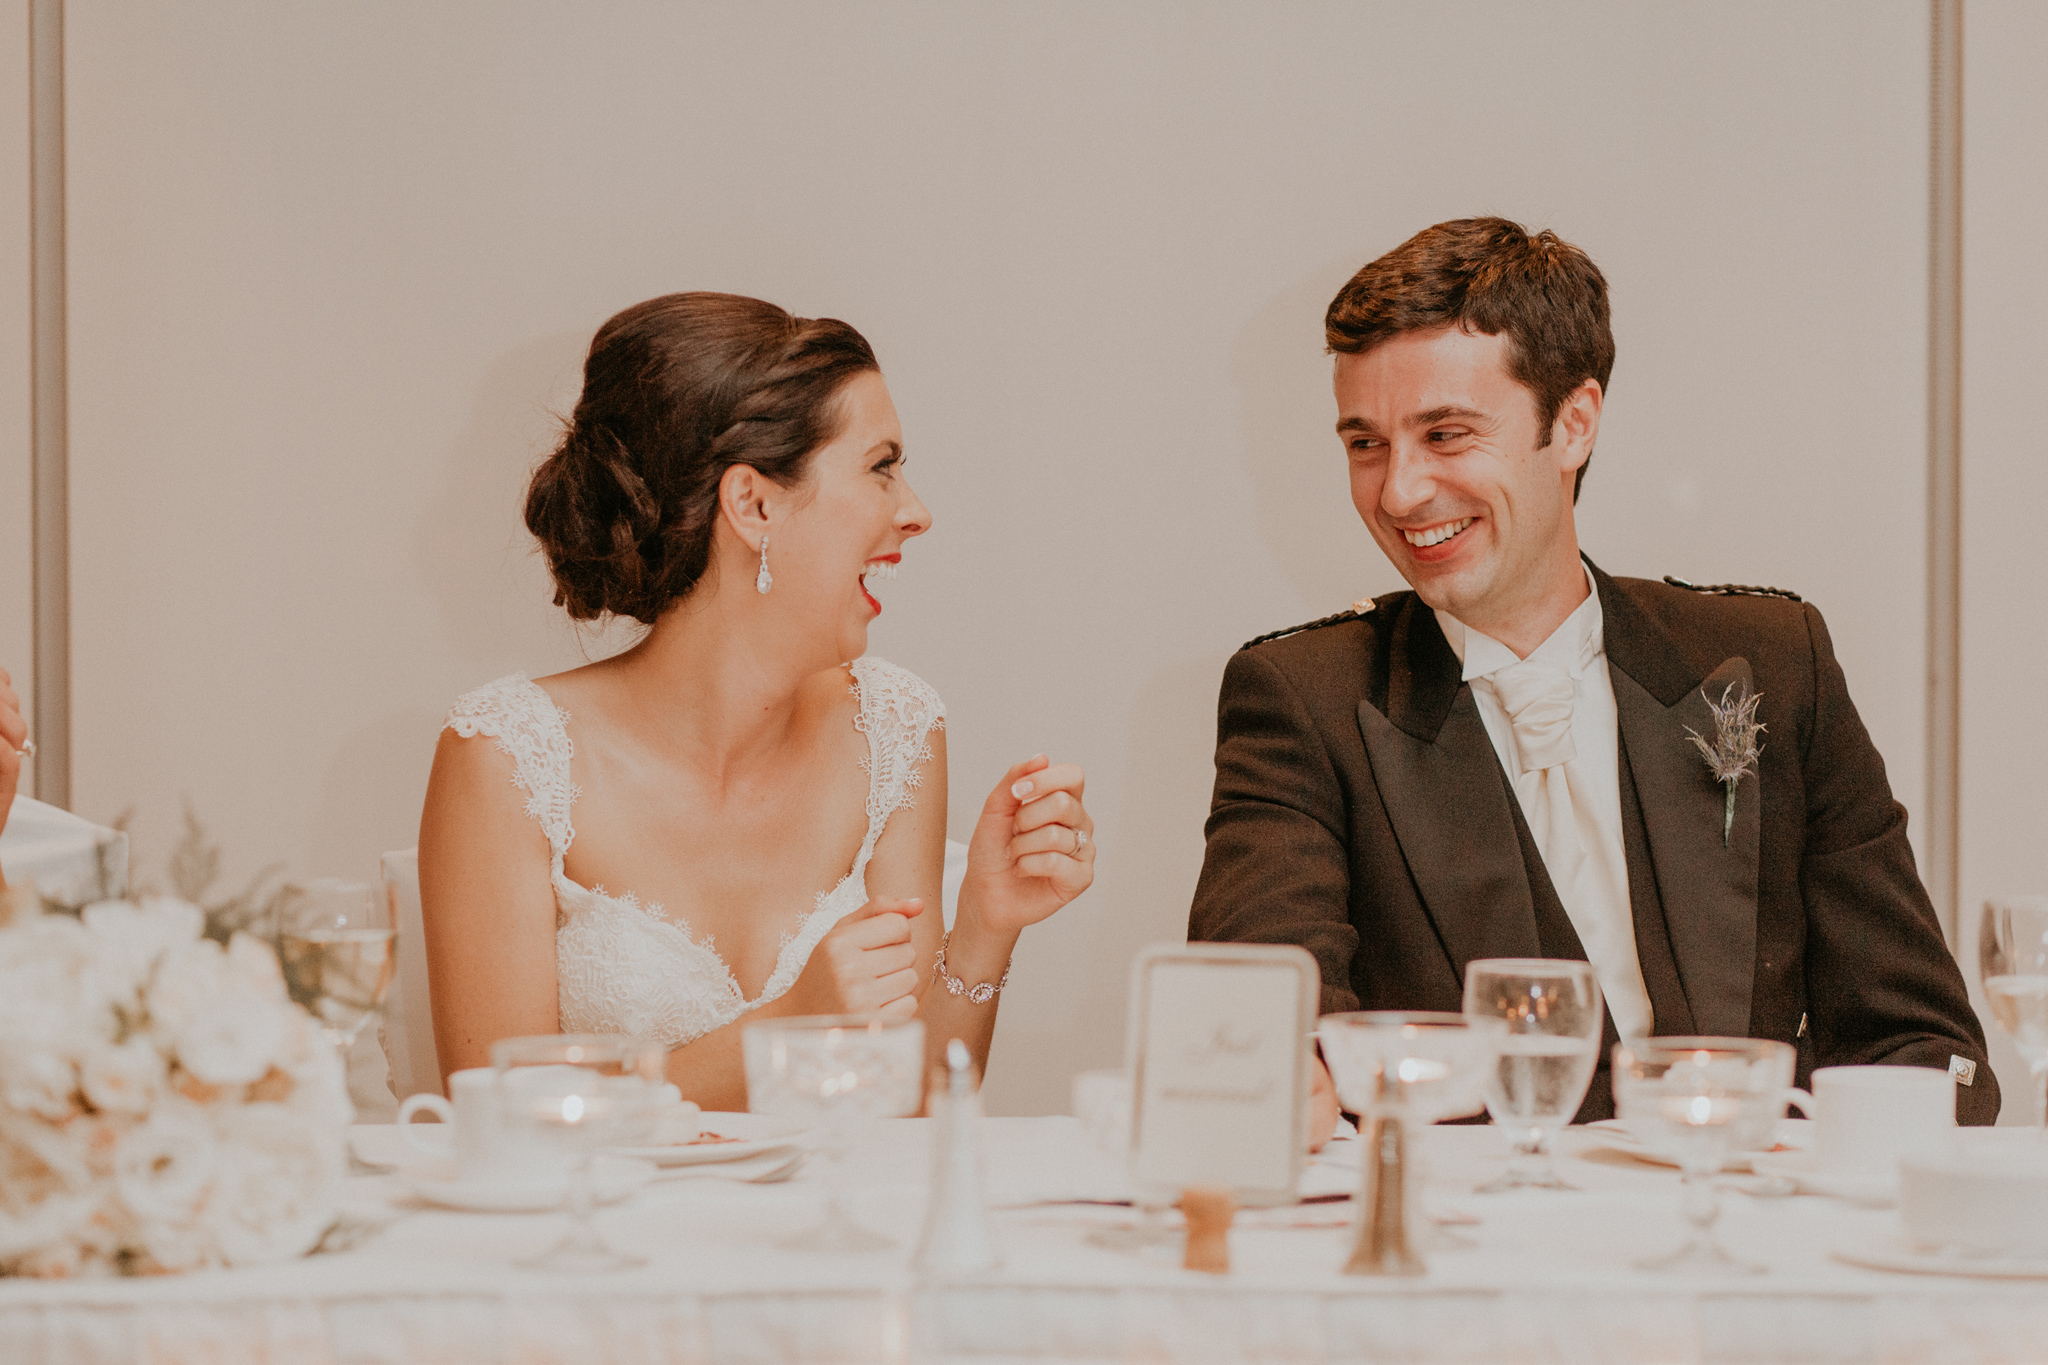 Candid documentary photo of bride and groom laughing during speech